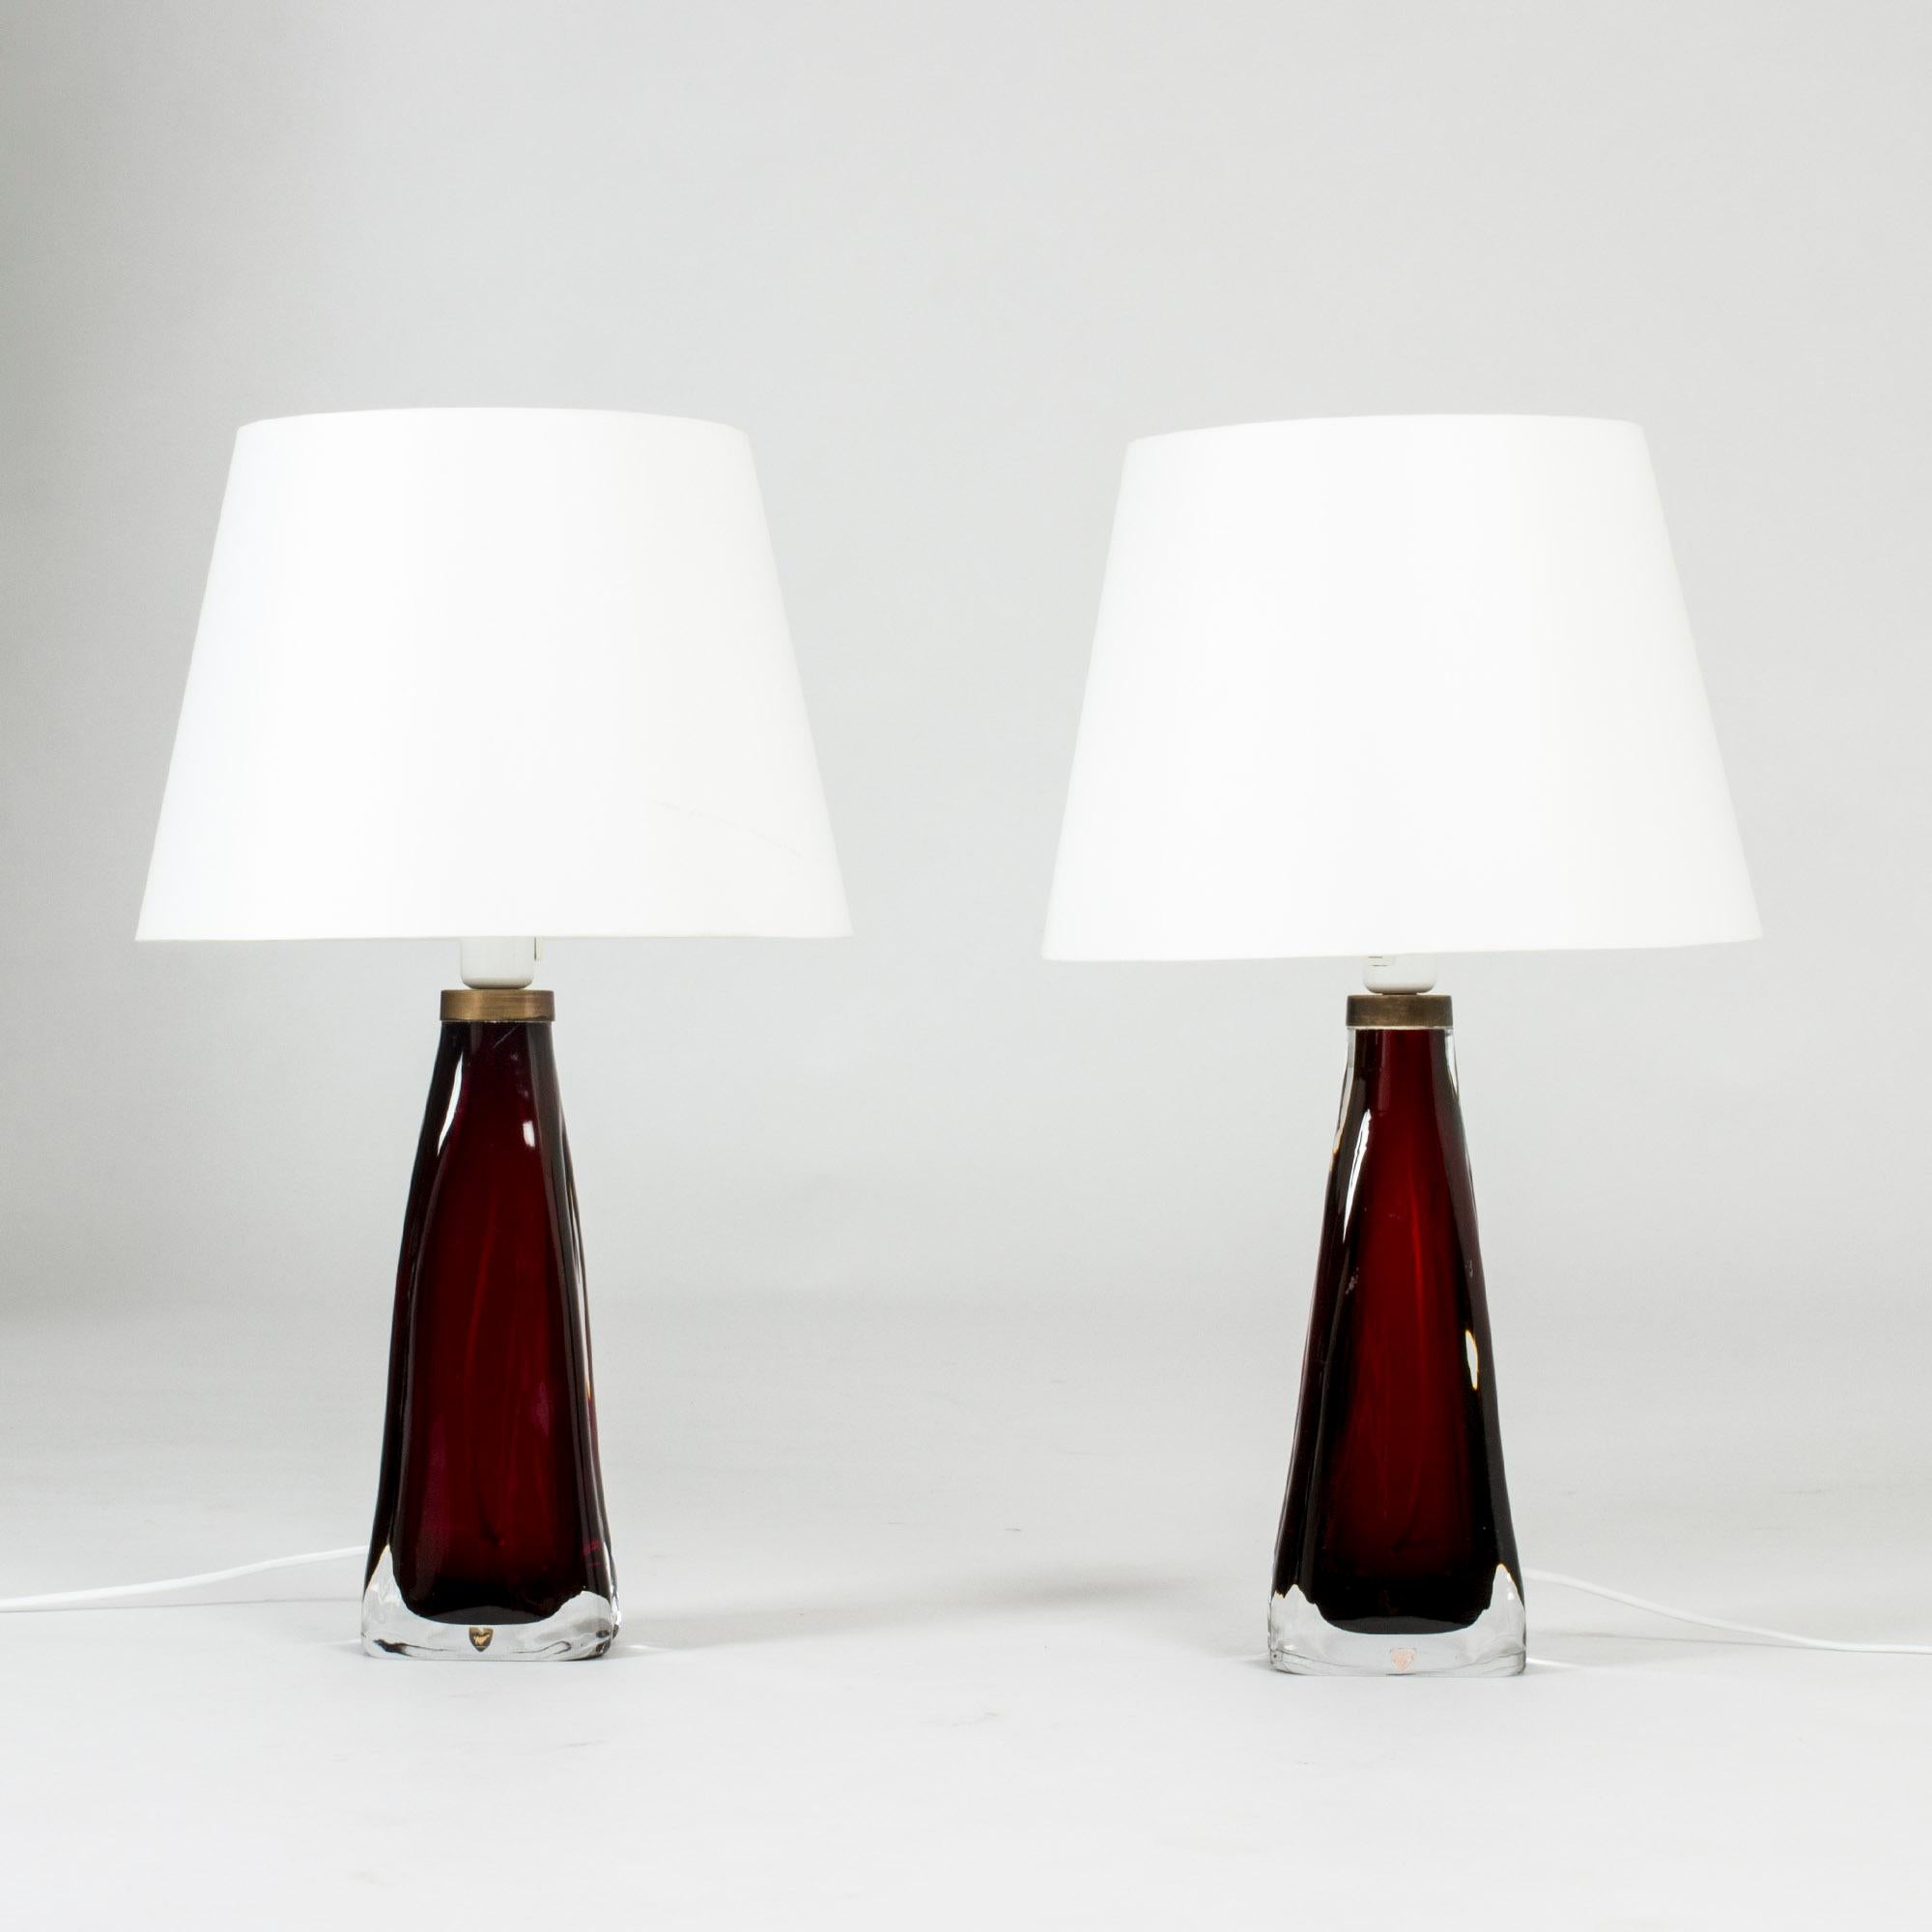 Pair of stunning dark, rich red, semi-translucent glass table lamps by Carl Fagerlund for Orrefors. Heavy glass bases with a somewhat undulating shape and brass detail at the top.